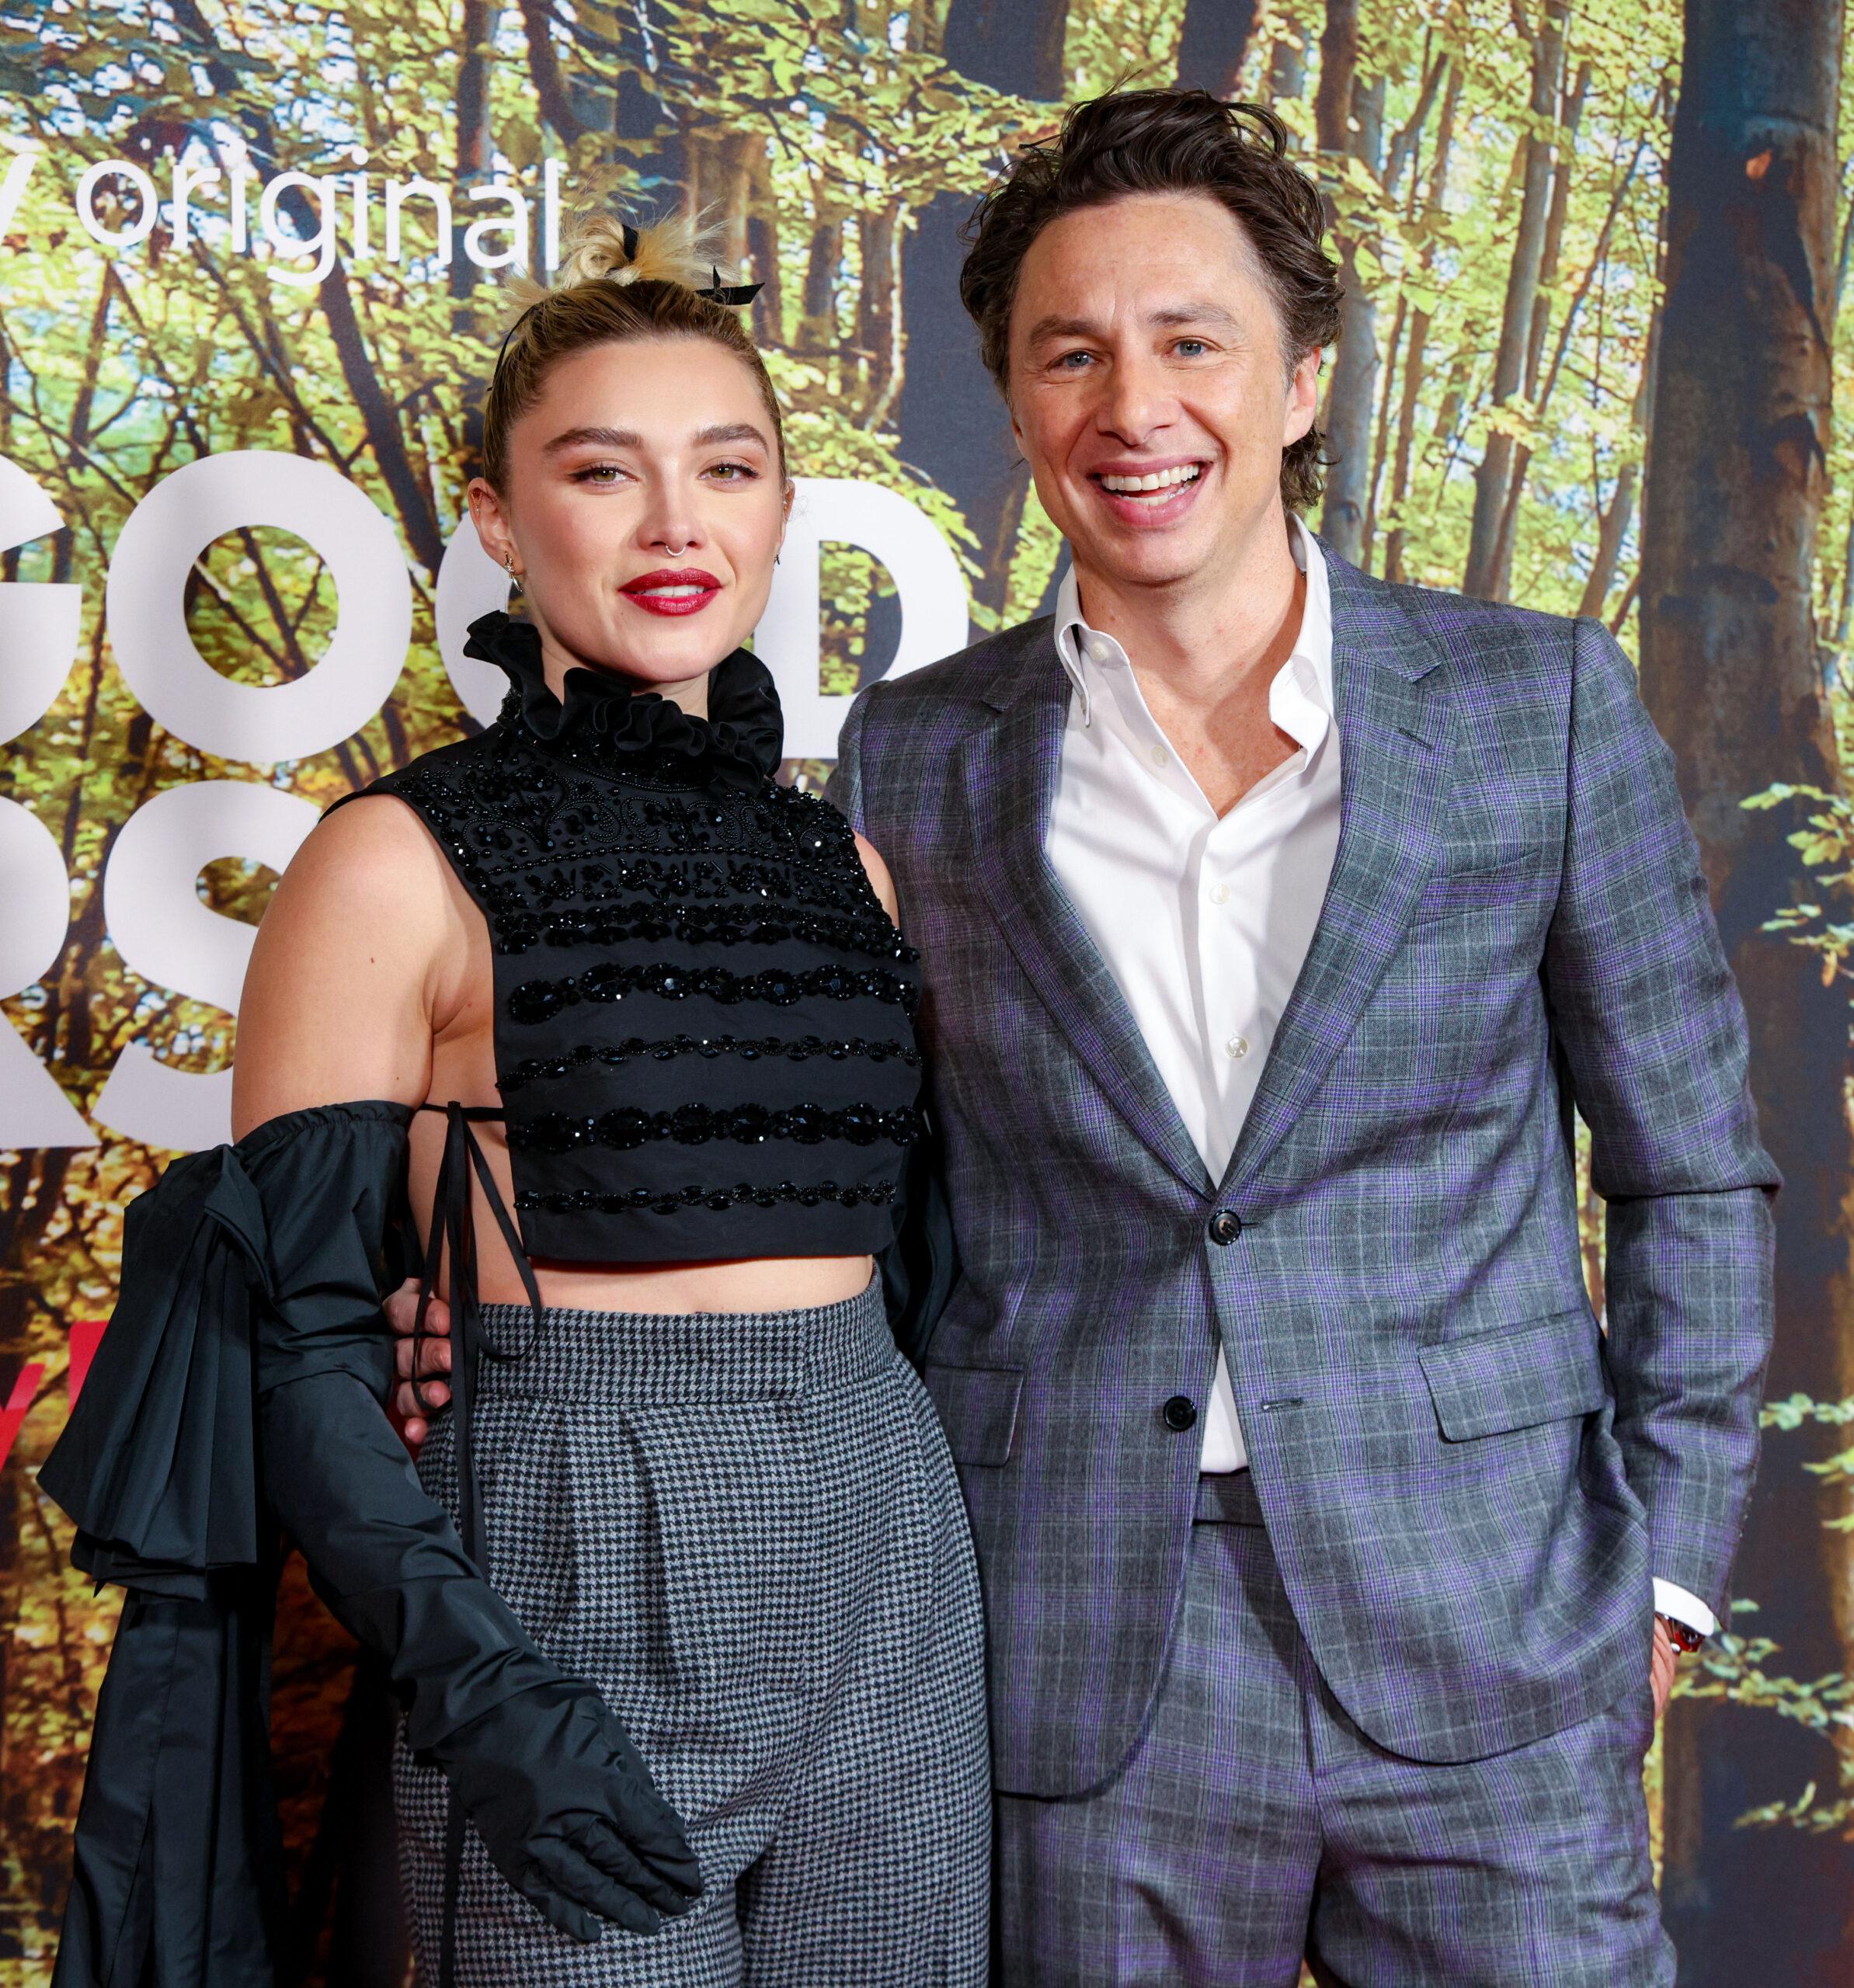 Zach Braff and Florence Pugh at Sky Original of 'A Good Person' Premiere at Ham Yard Hotel in London